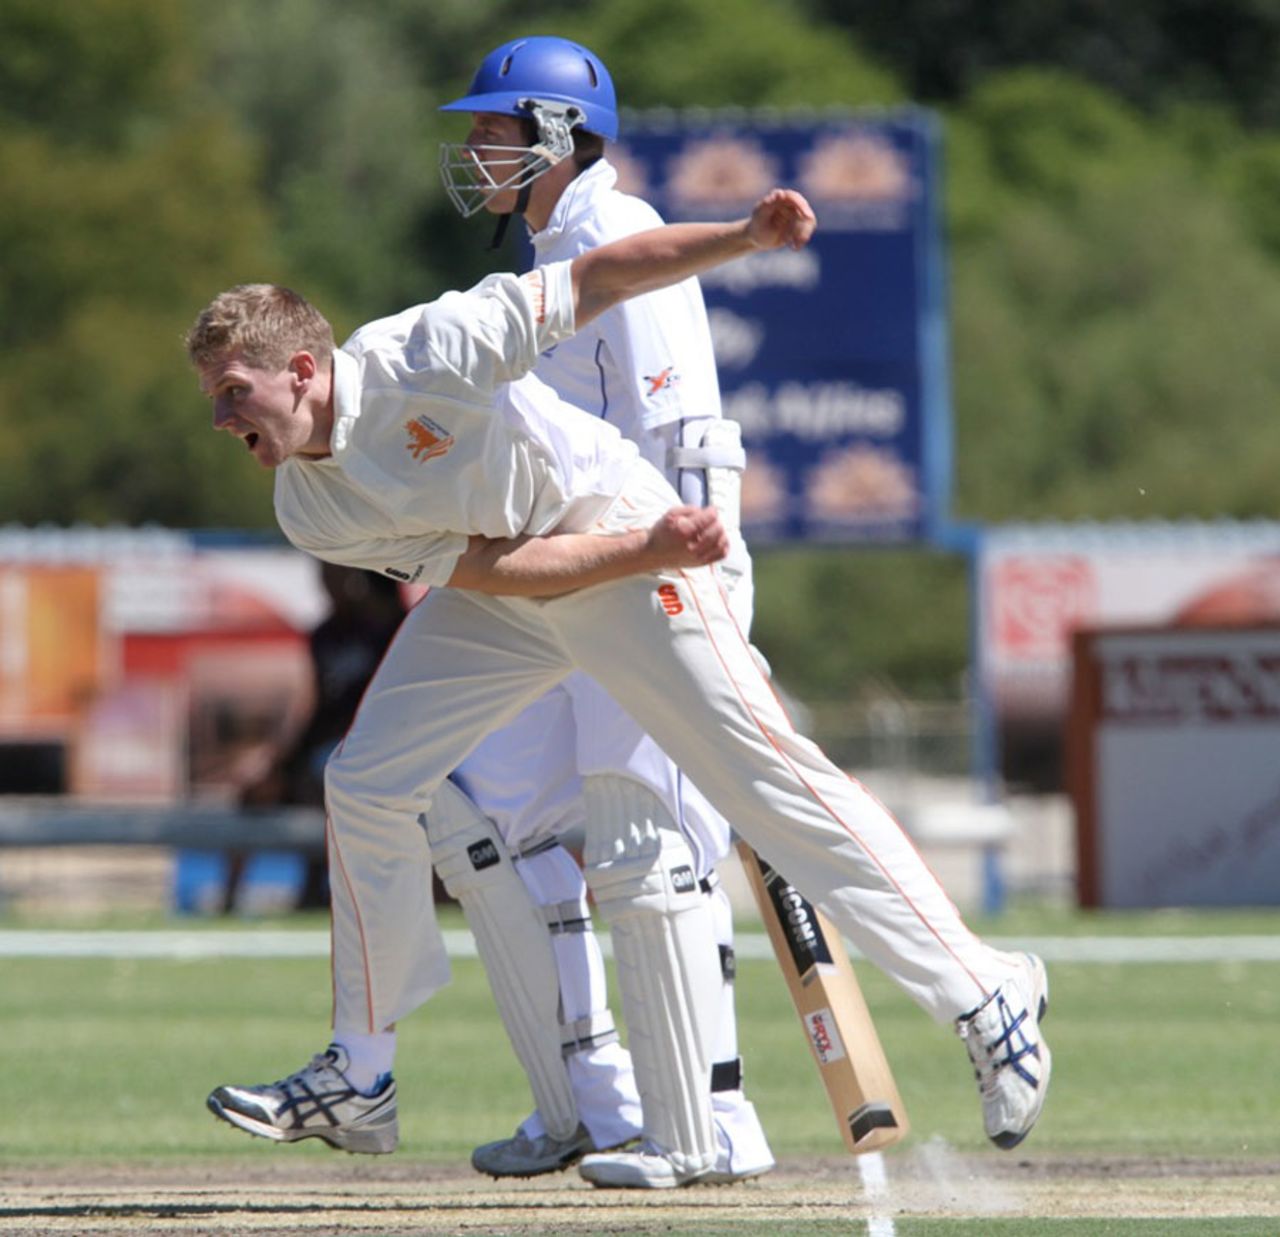 Timm van der Gugten in his follow through, Namibia v Netherlands, ICC Intercontinental Cup 2011-13, 1st day, Windhoek, April 11, 2013